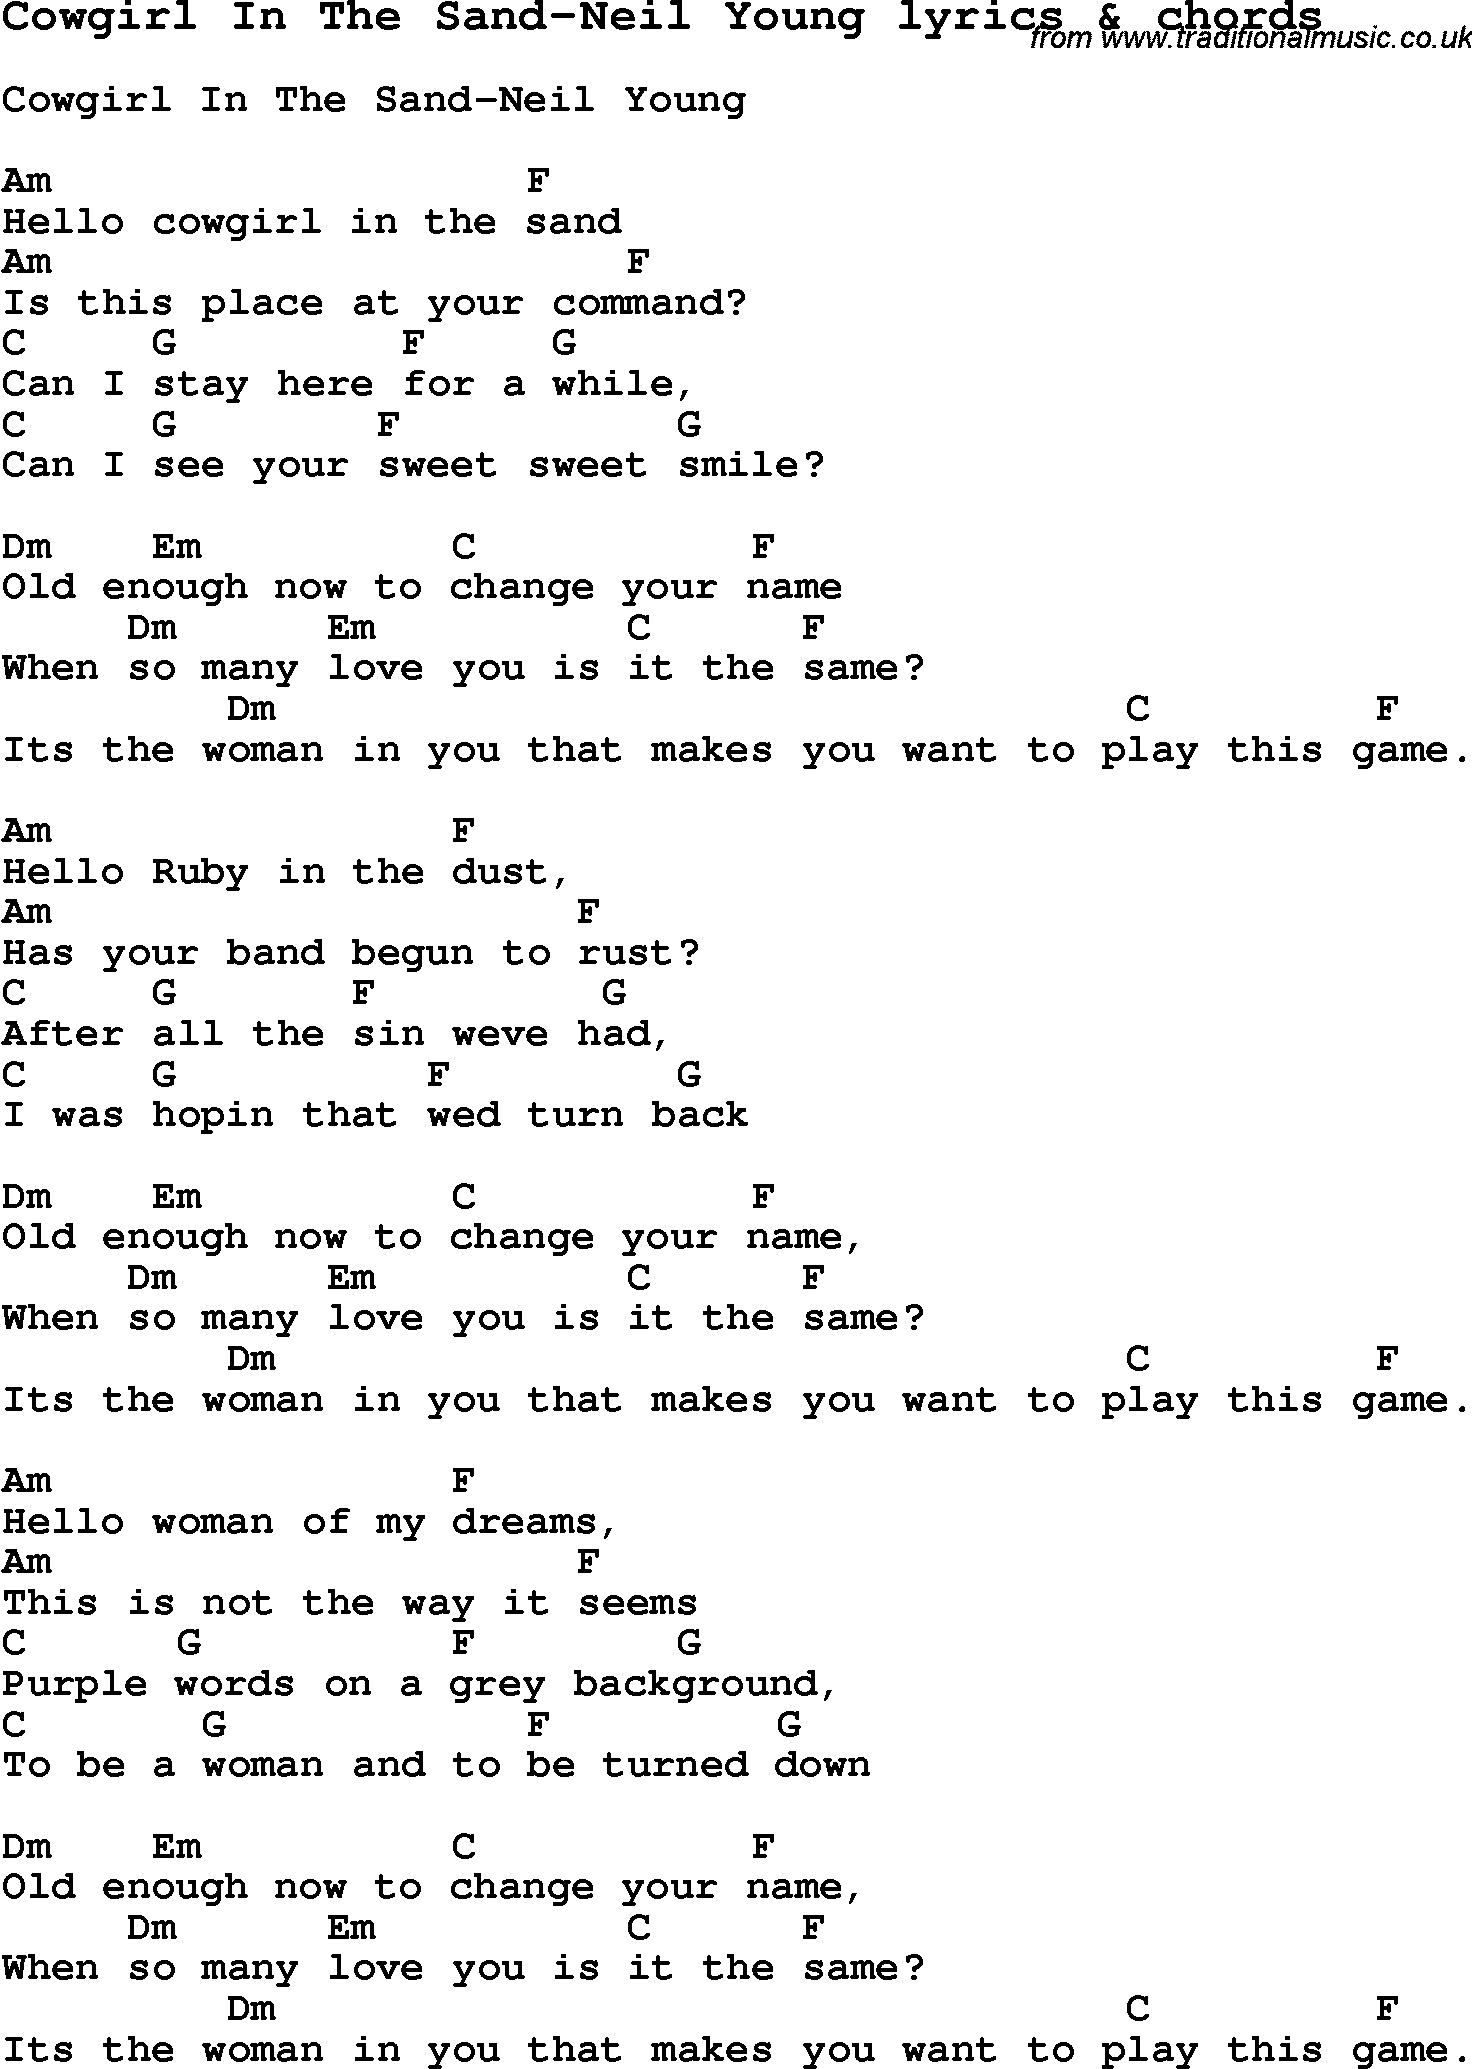 Love Song Lyrics for: Cowgirl In The Sand-Neil Young with chords for Ukulele, Guitar Banjo etc.